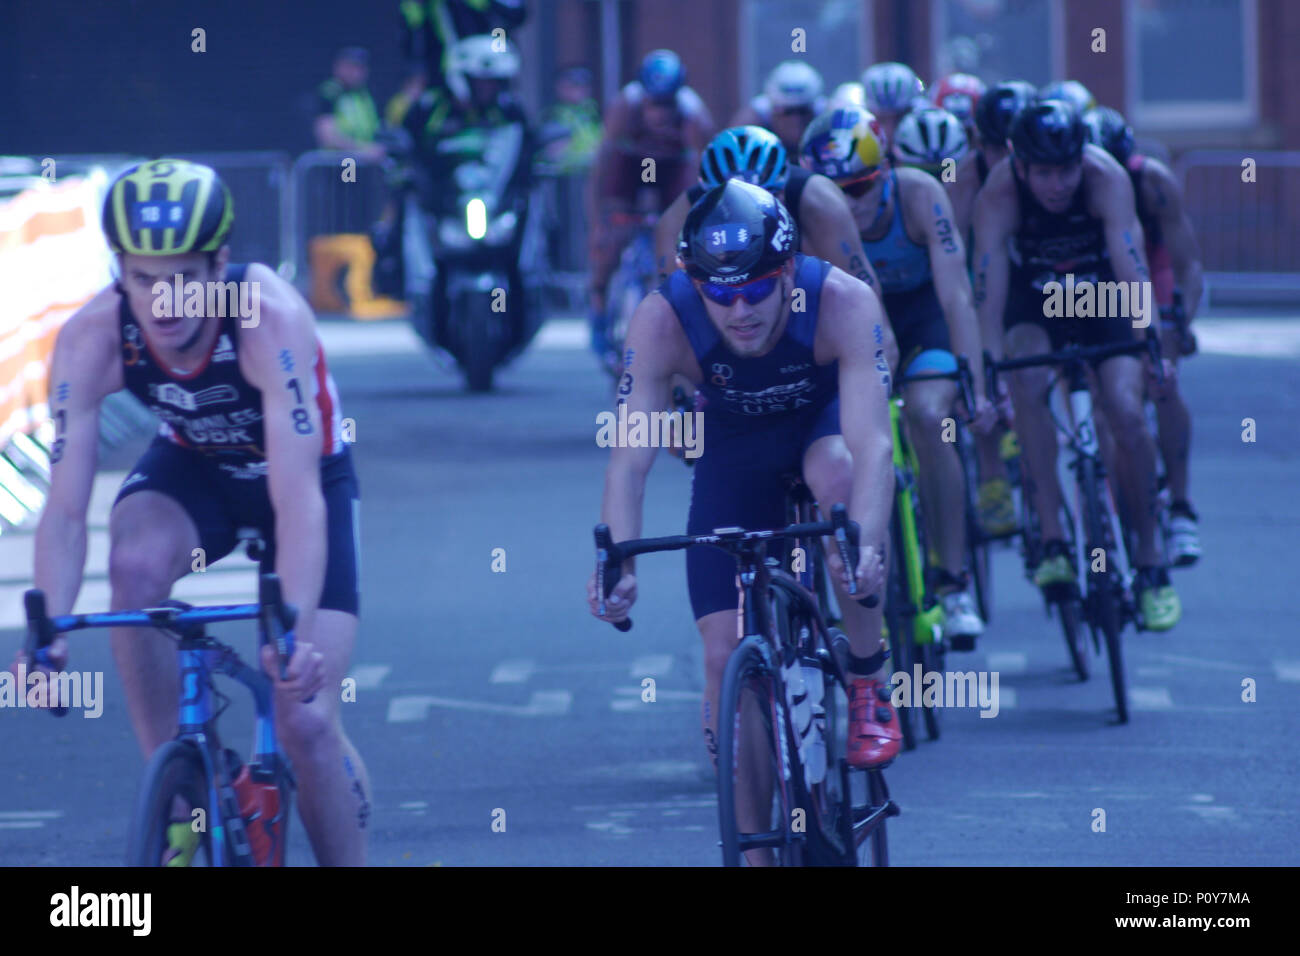 Leeds, Uk. 10th June 2018. Jonny Brownlee, number 18, of GBR and Ben Kanute, number 31 of USA, during the bike section of the ITU World series Triathlon Leeds mens' event. Credit: Jonathan Sedgwick/ Alamy Live News. Stock Photo